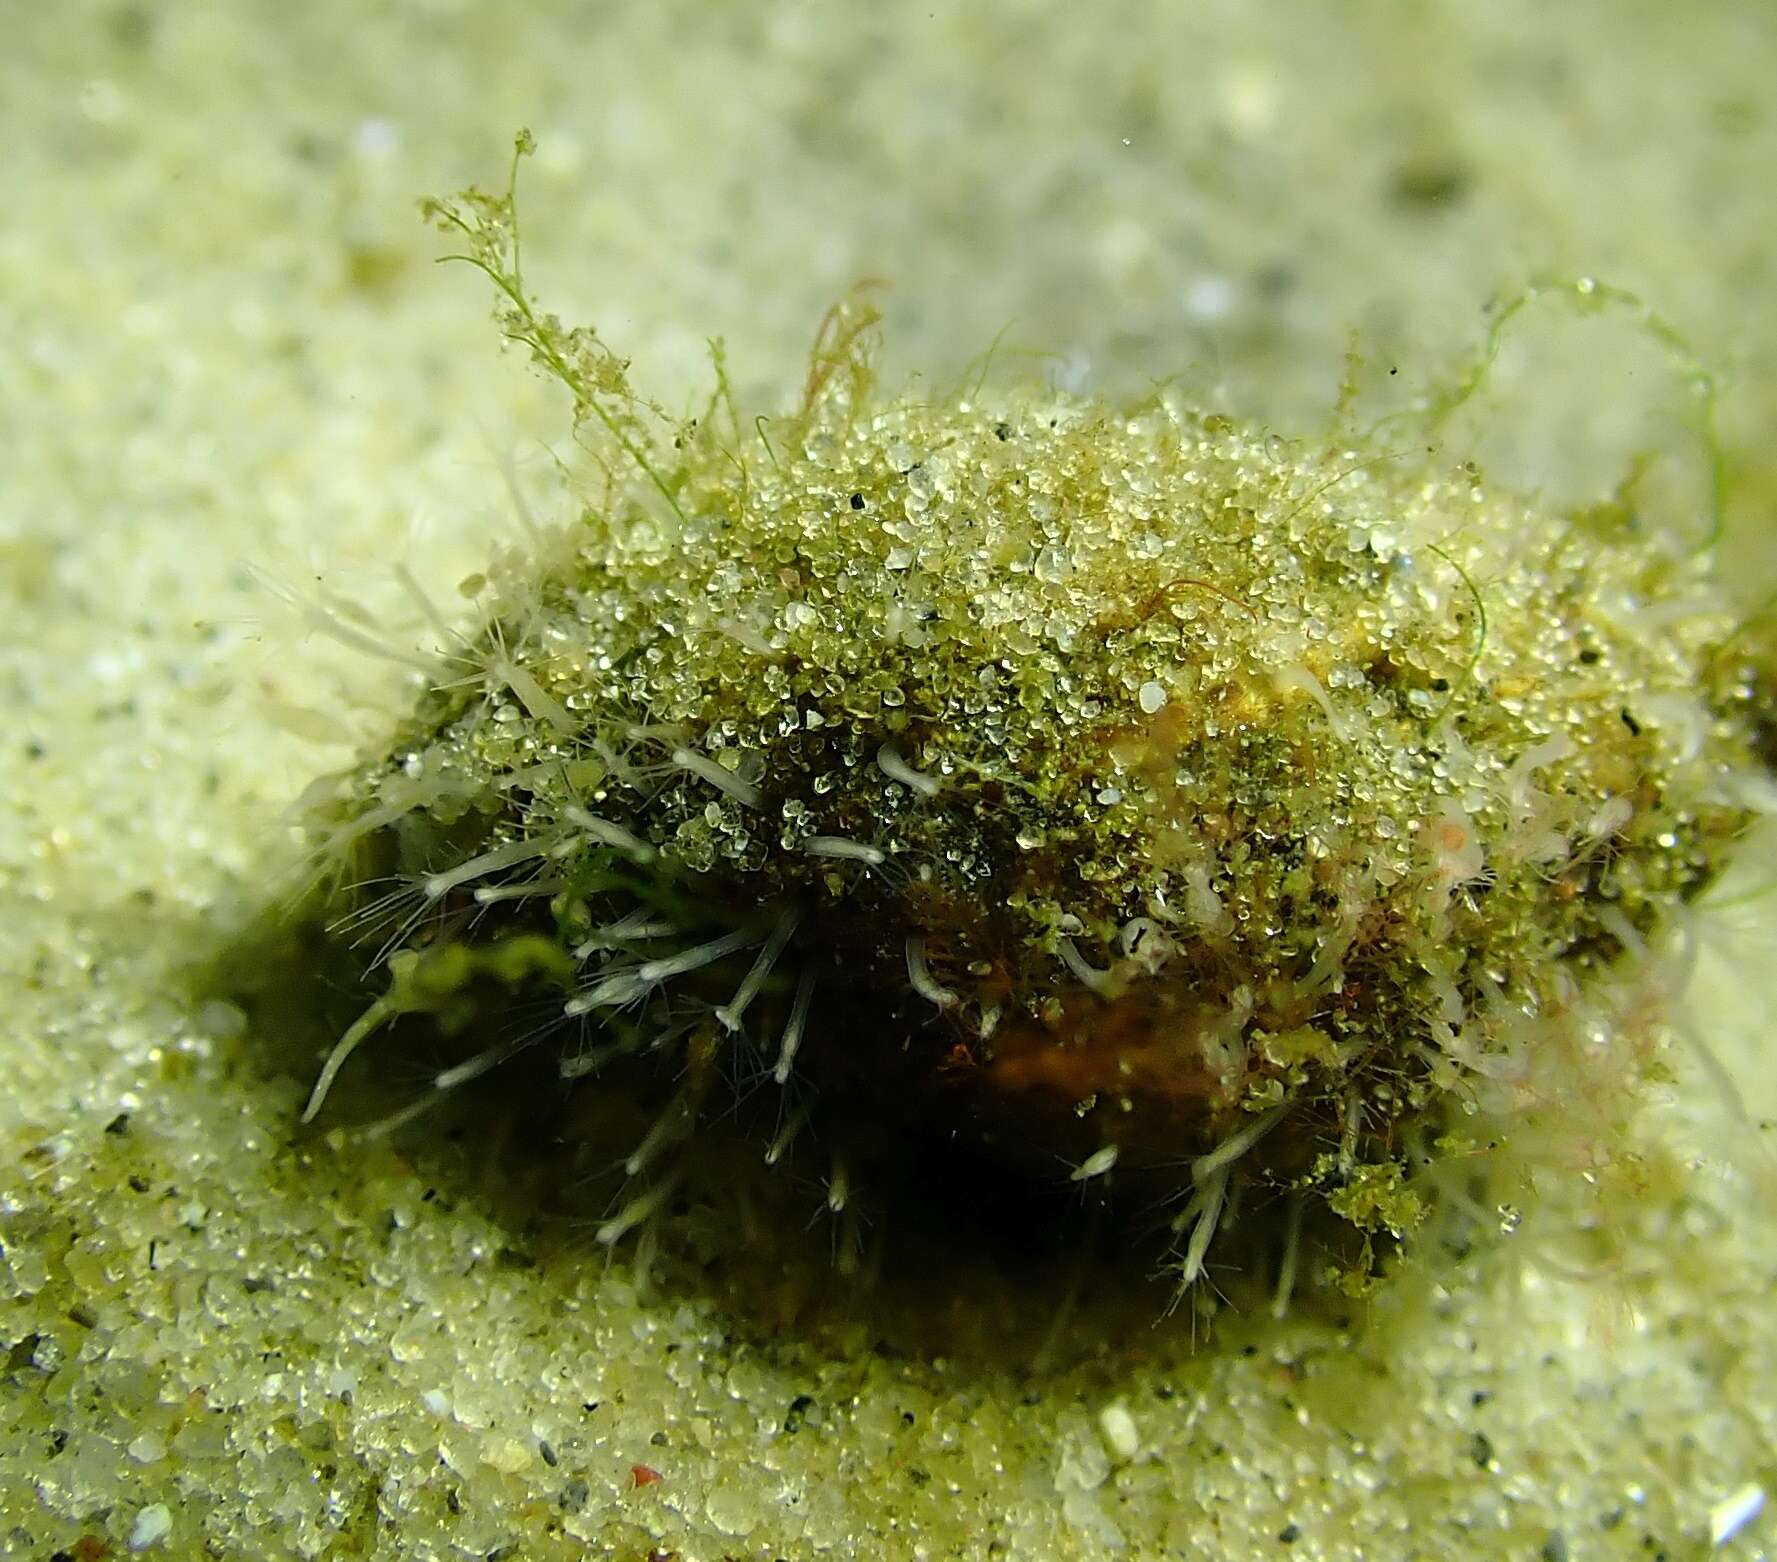 Image of Snail fur hydroid